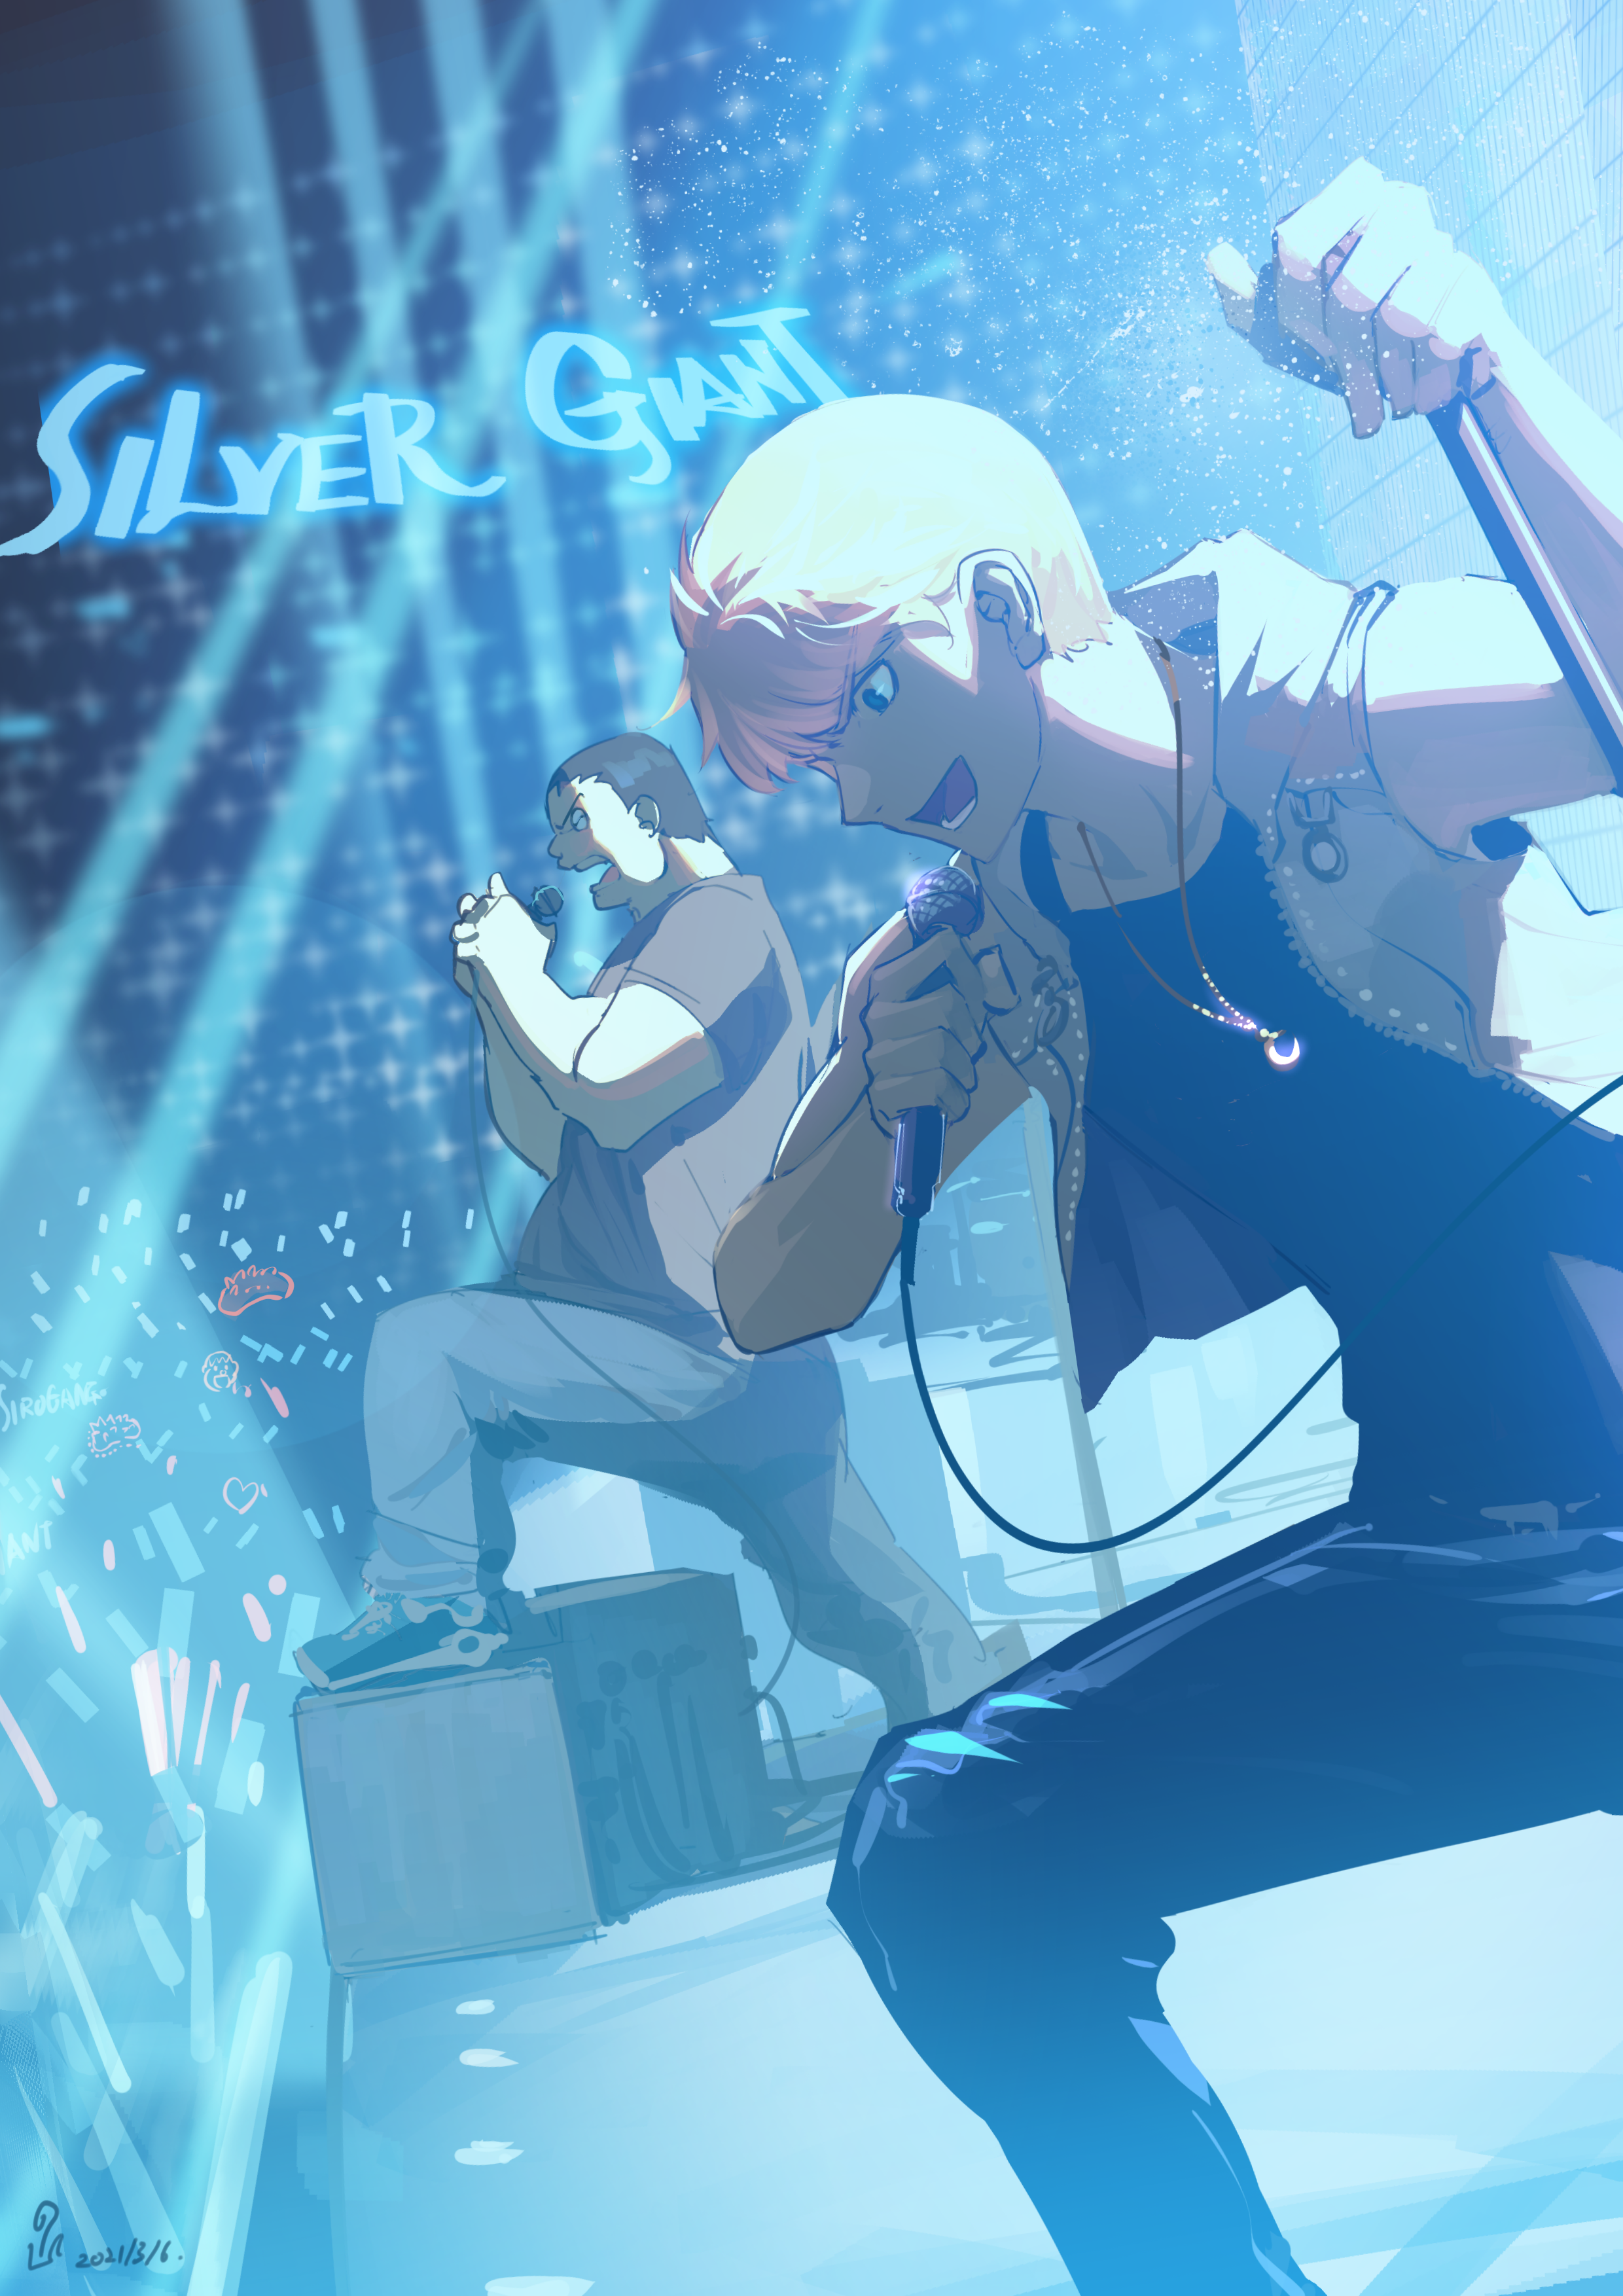 Silver Giant Concert